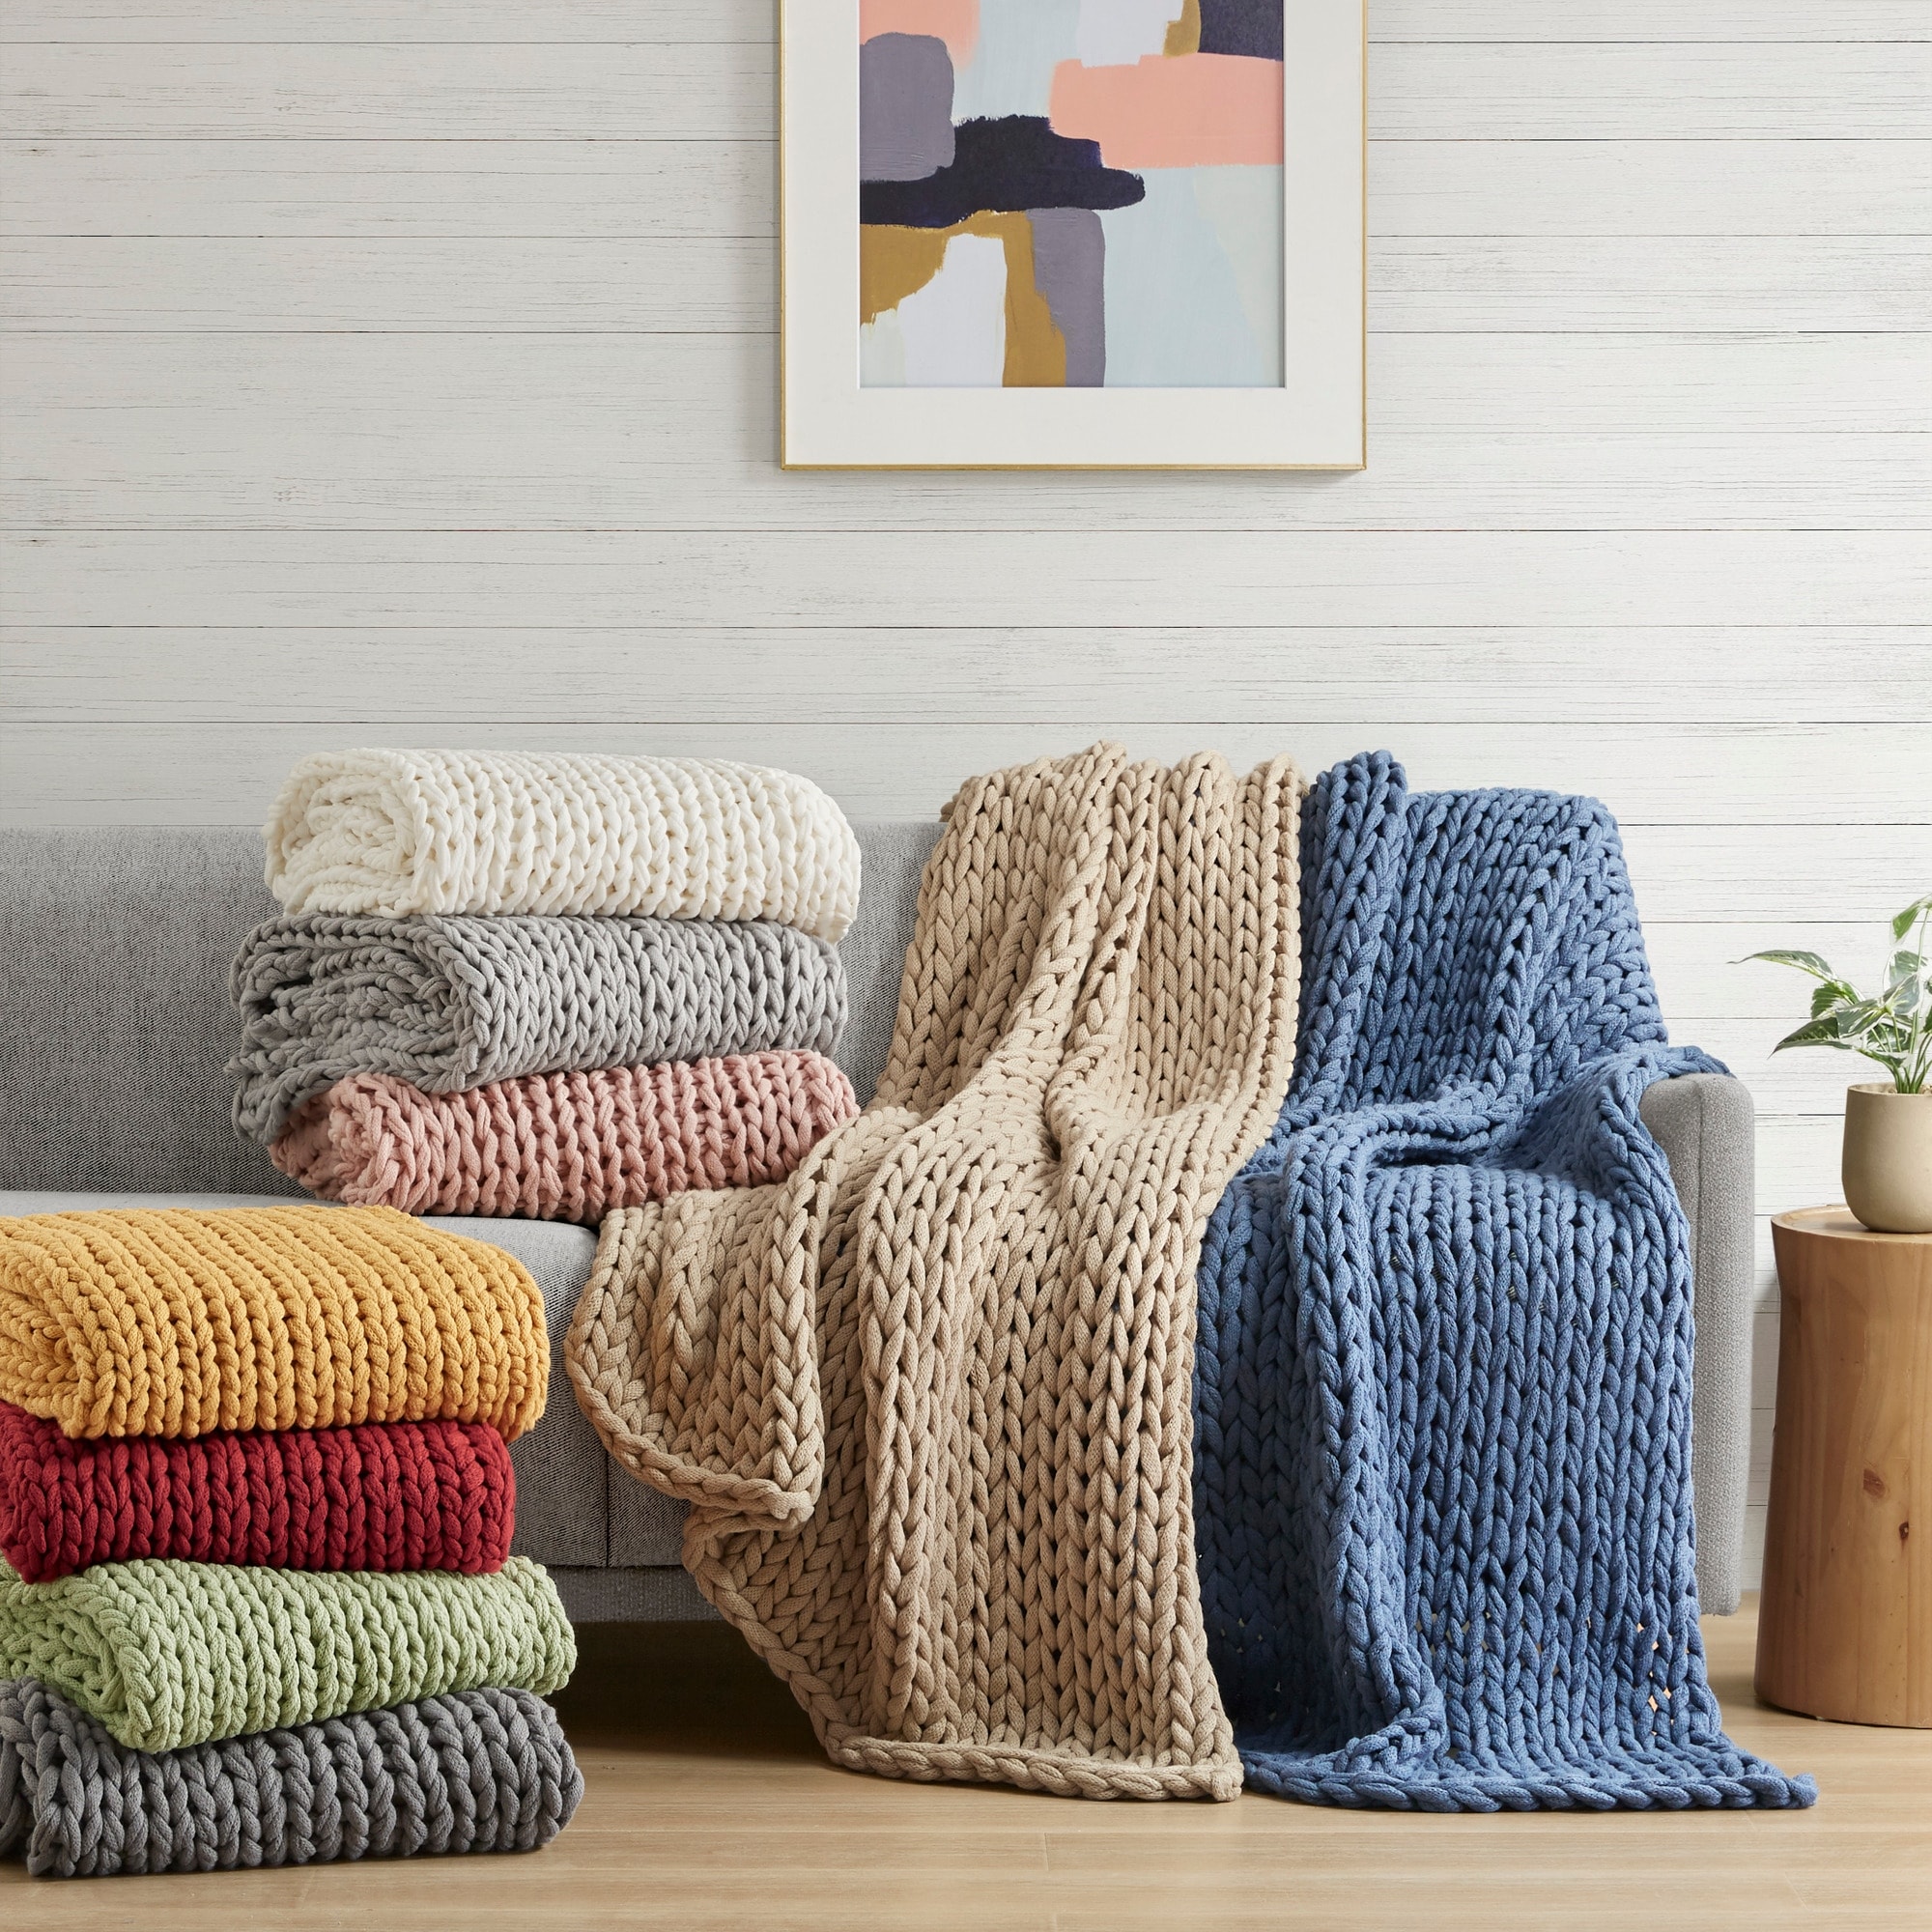 https://ak1.ostkcdn.com/images/products/is/images/direct/4932a700541823efb6a133ed77328b1a4523d9c1/Madison-Park-Chunky-Double-Knit-Handmade-Throw-Blanket.jpg